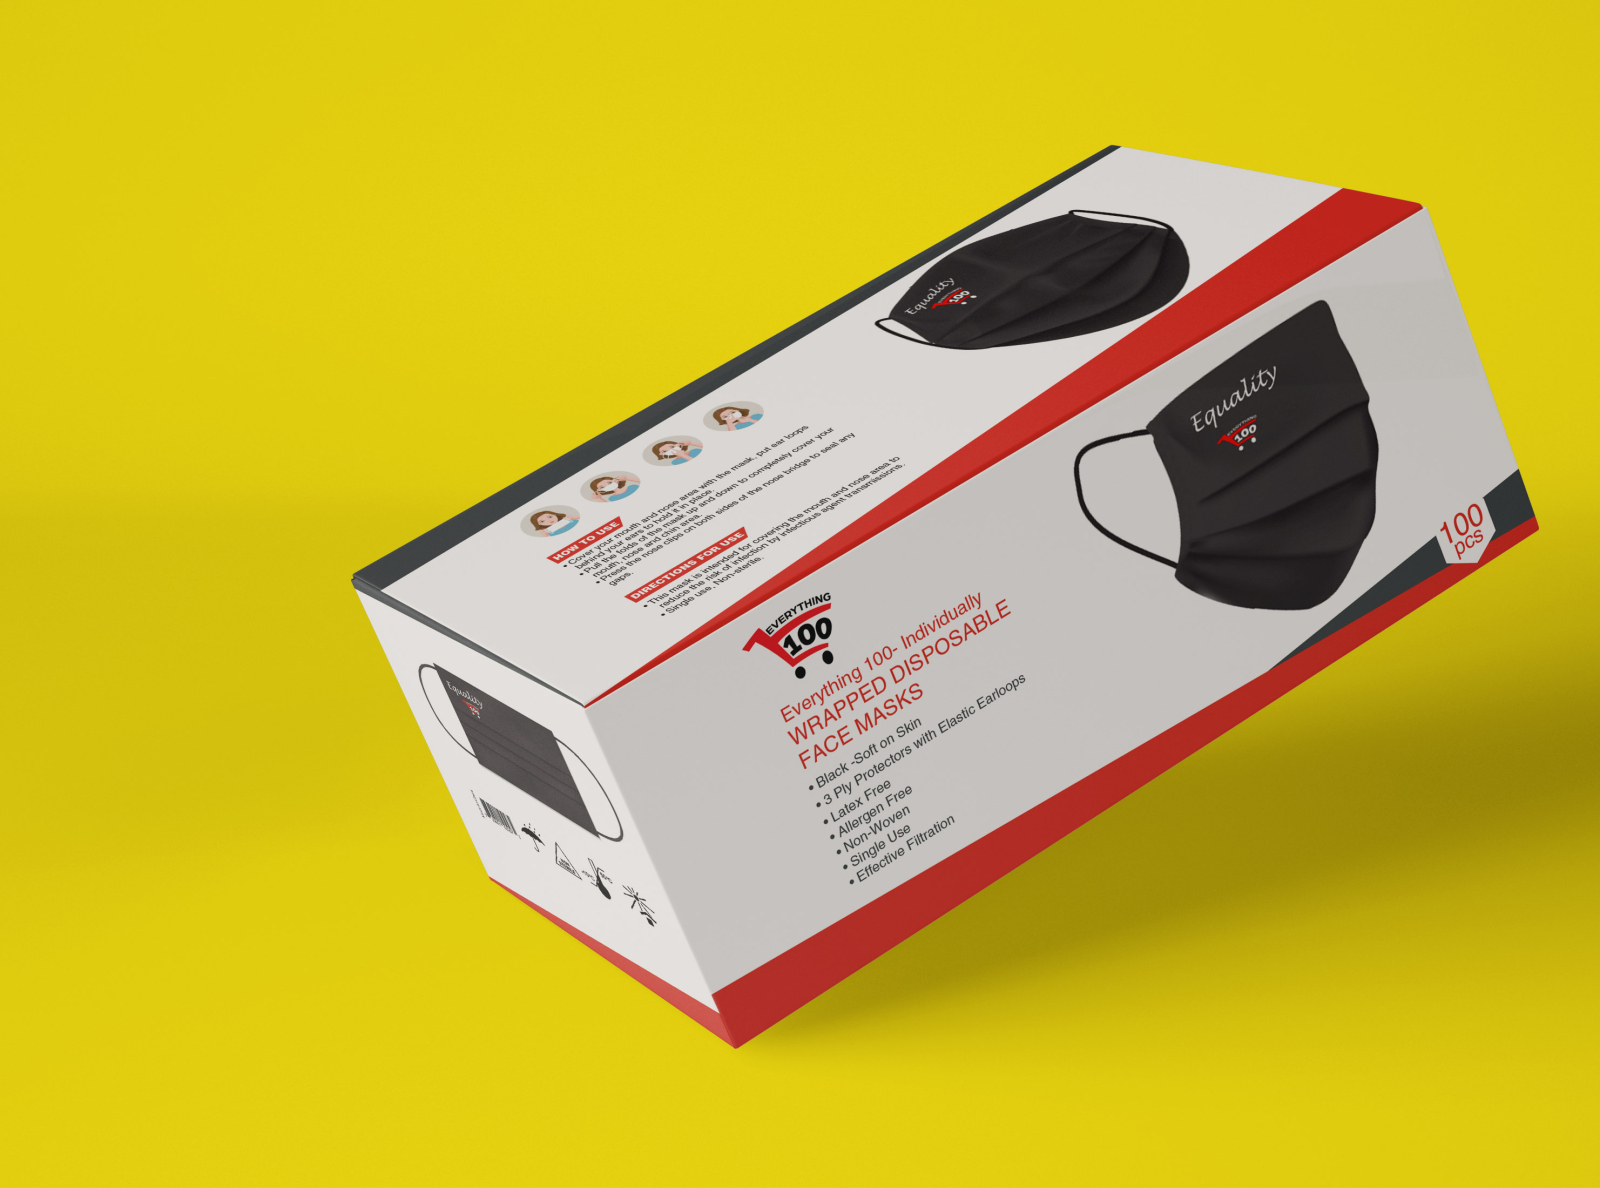 Download Face Mask Box Packaging Design with Free 3D Mockup by The ...